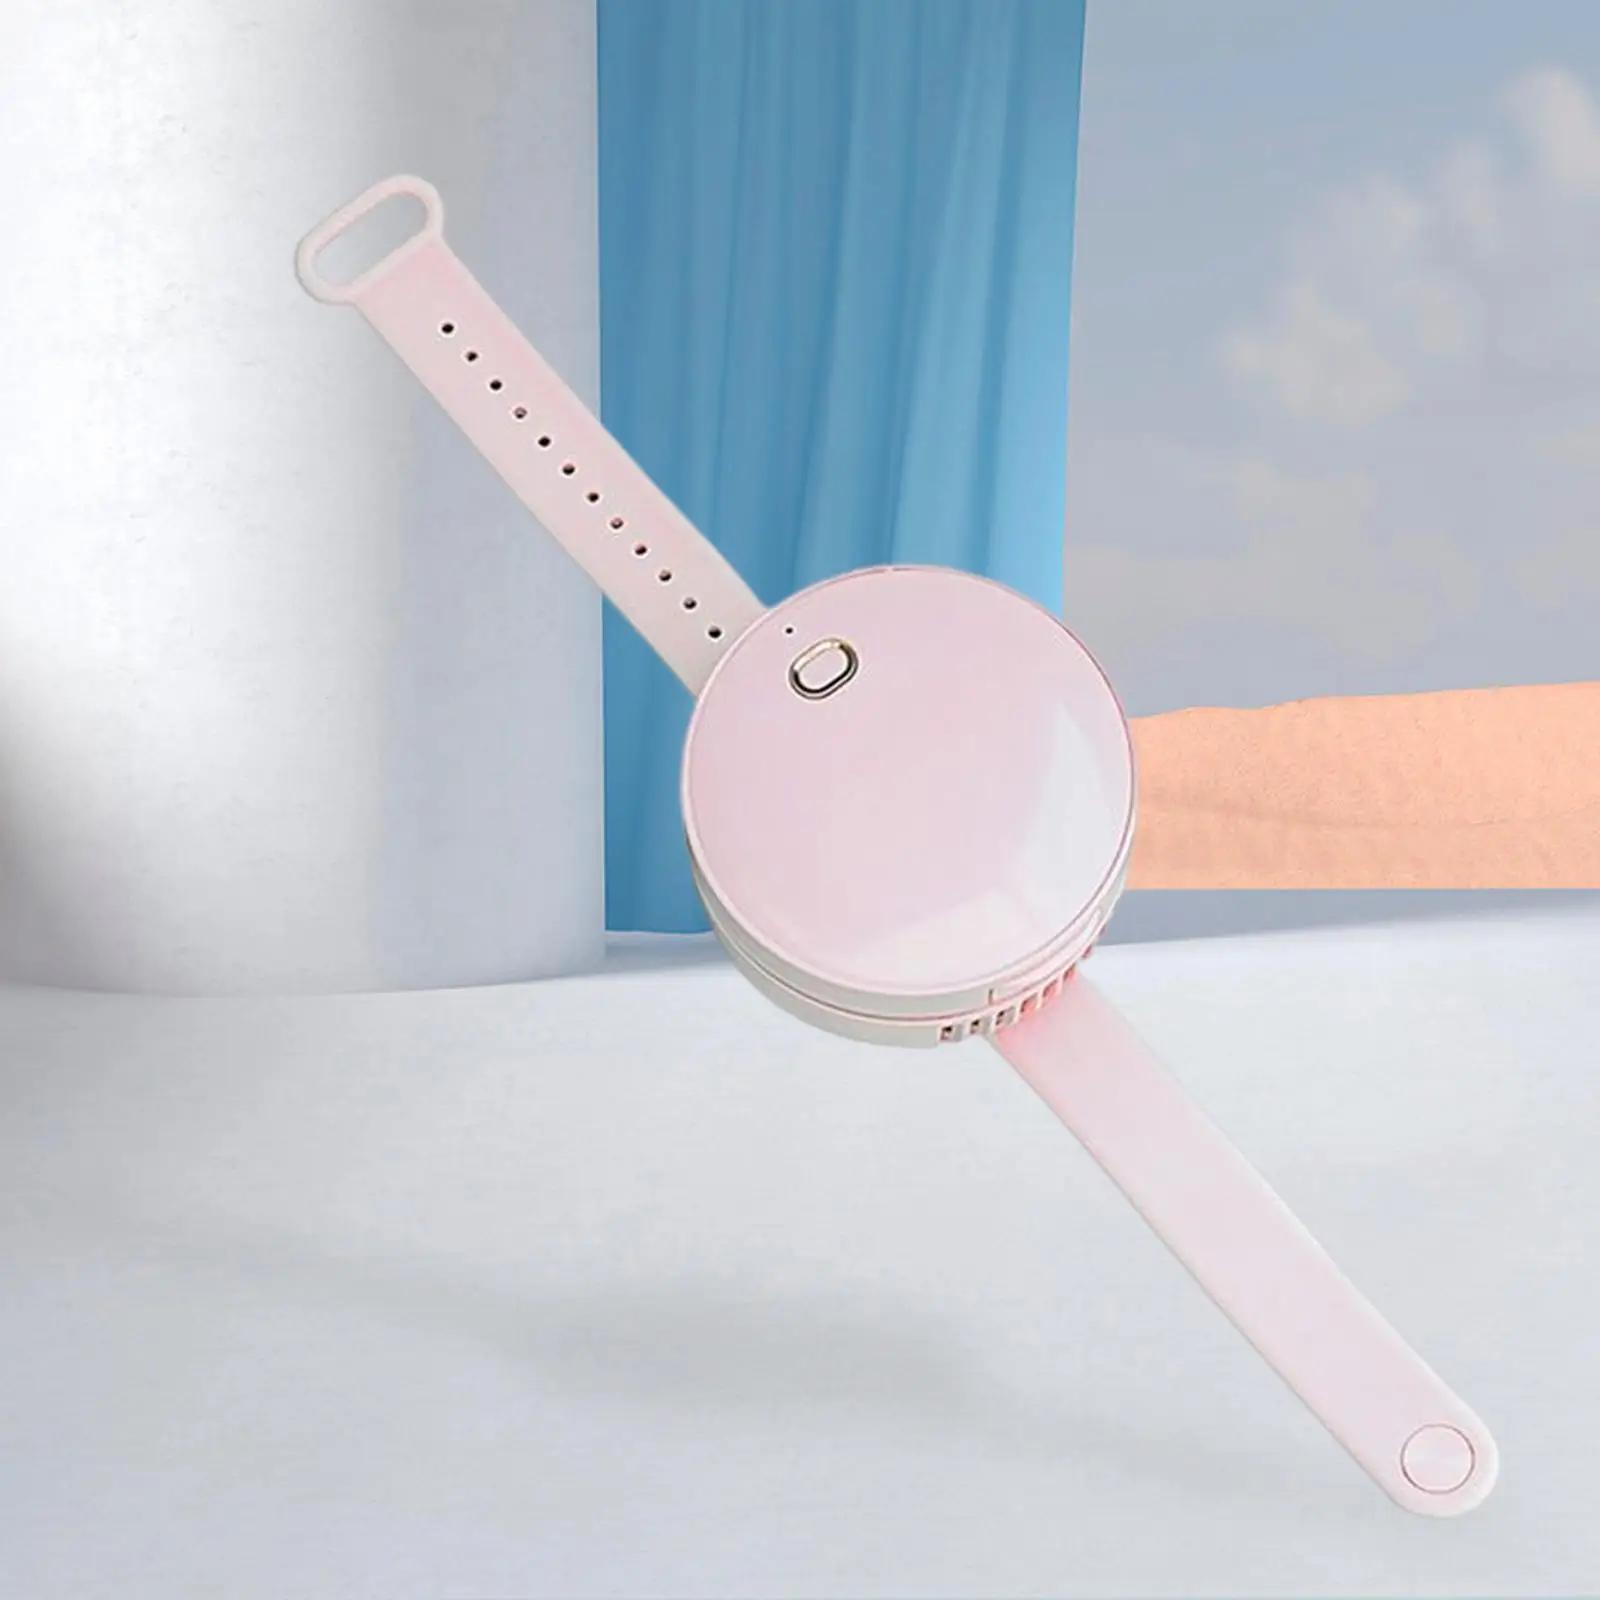 Portable Handheld Wrist Wear Fan USB Charging with Mirror Weighs Only 100G Indoor Outdoor Convenient to Carry for Women Makeup